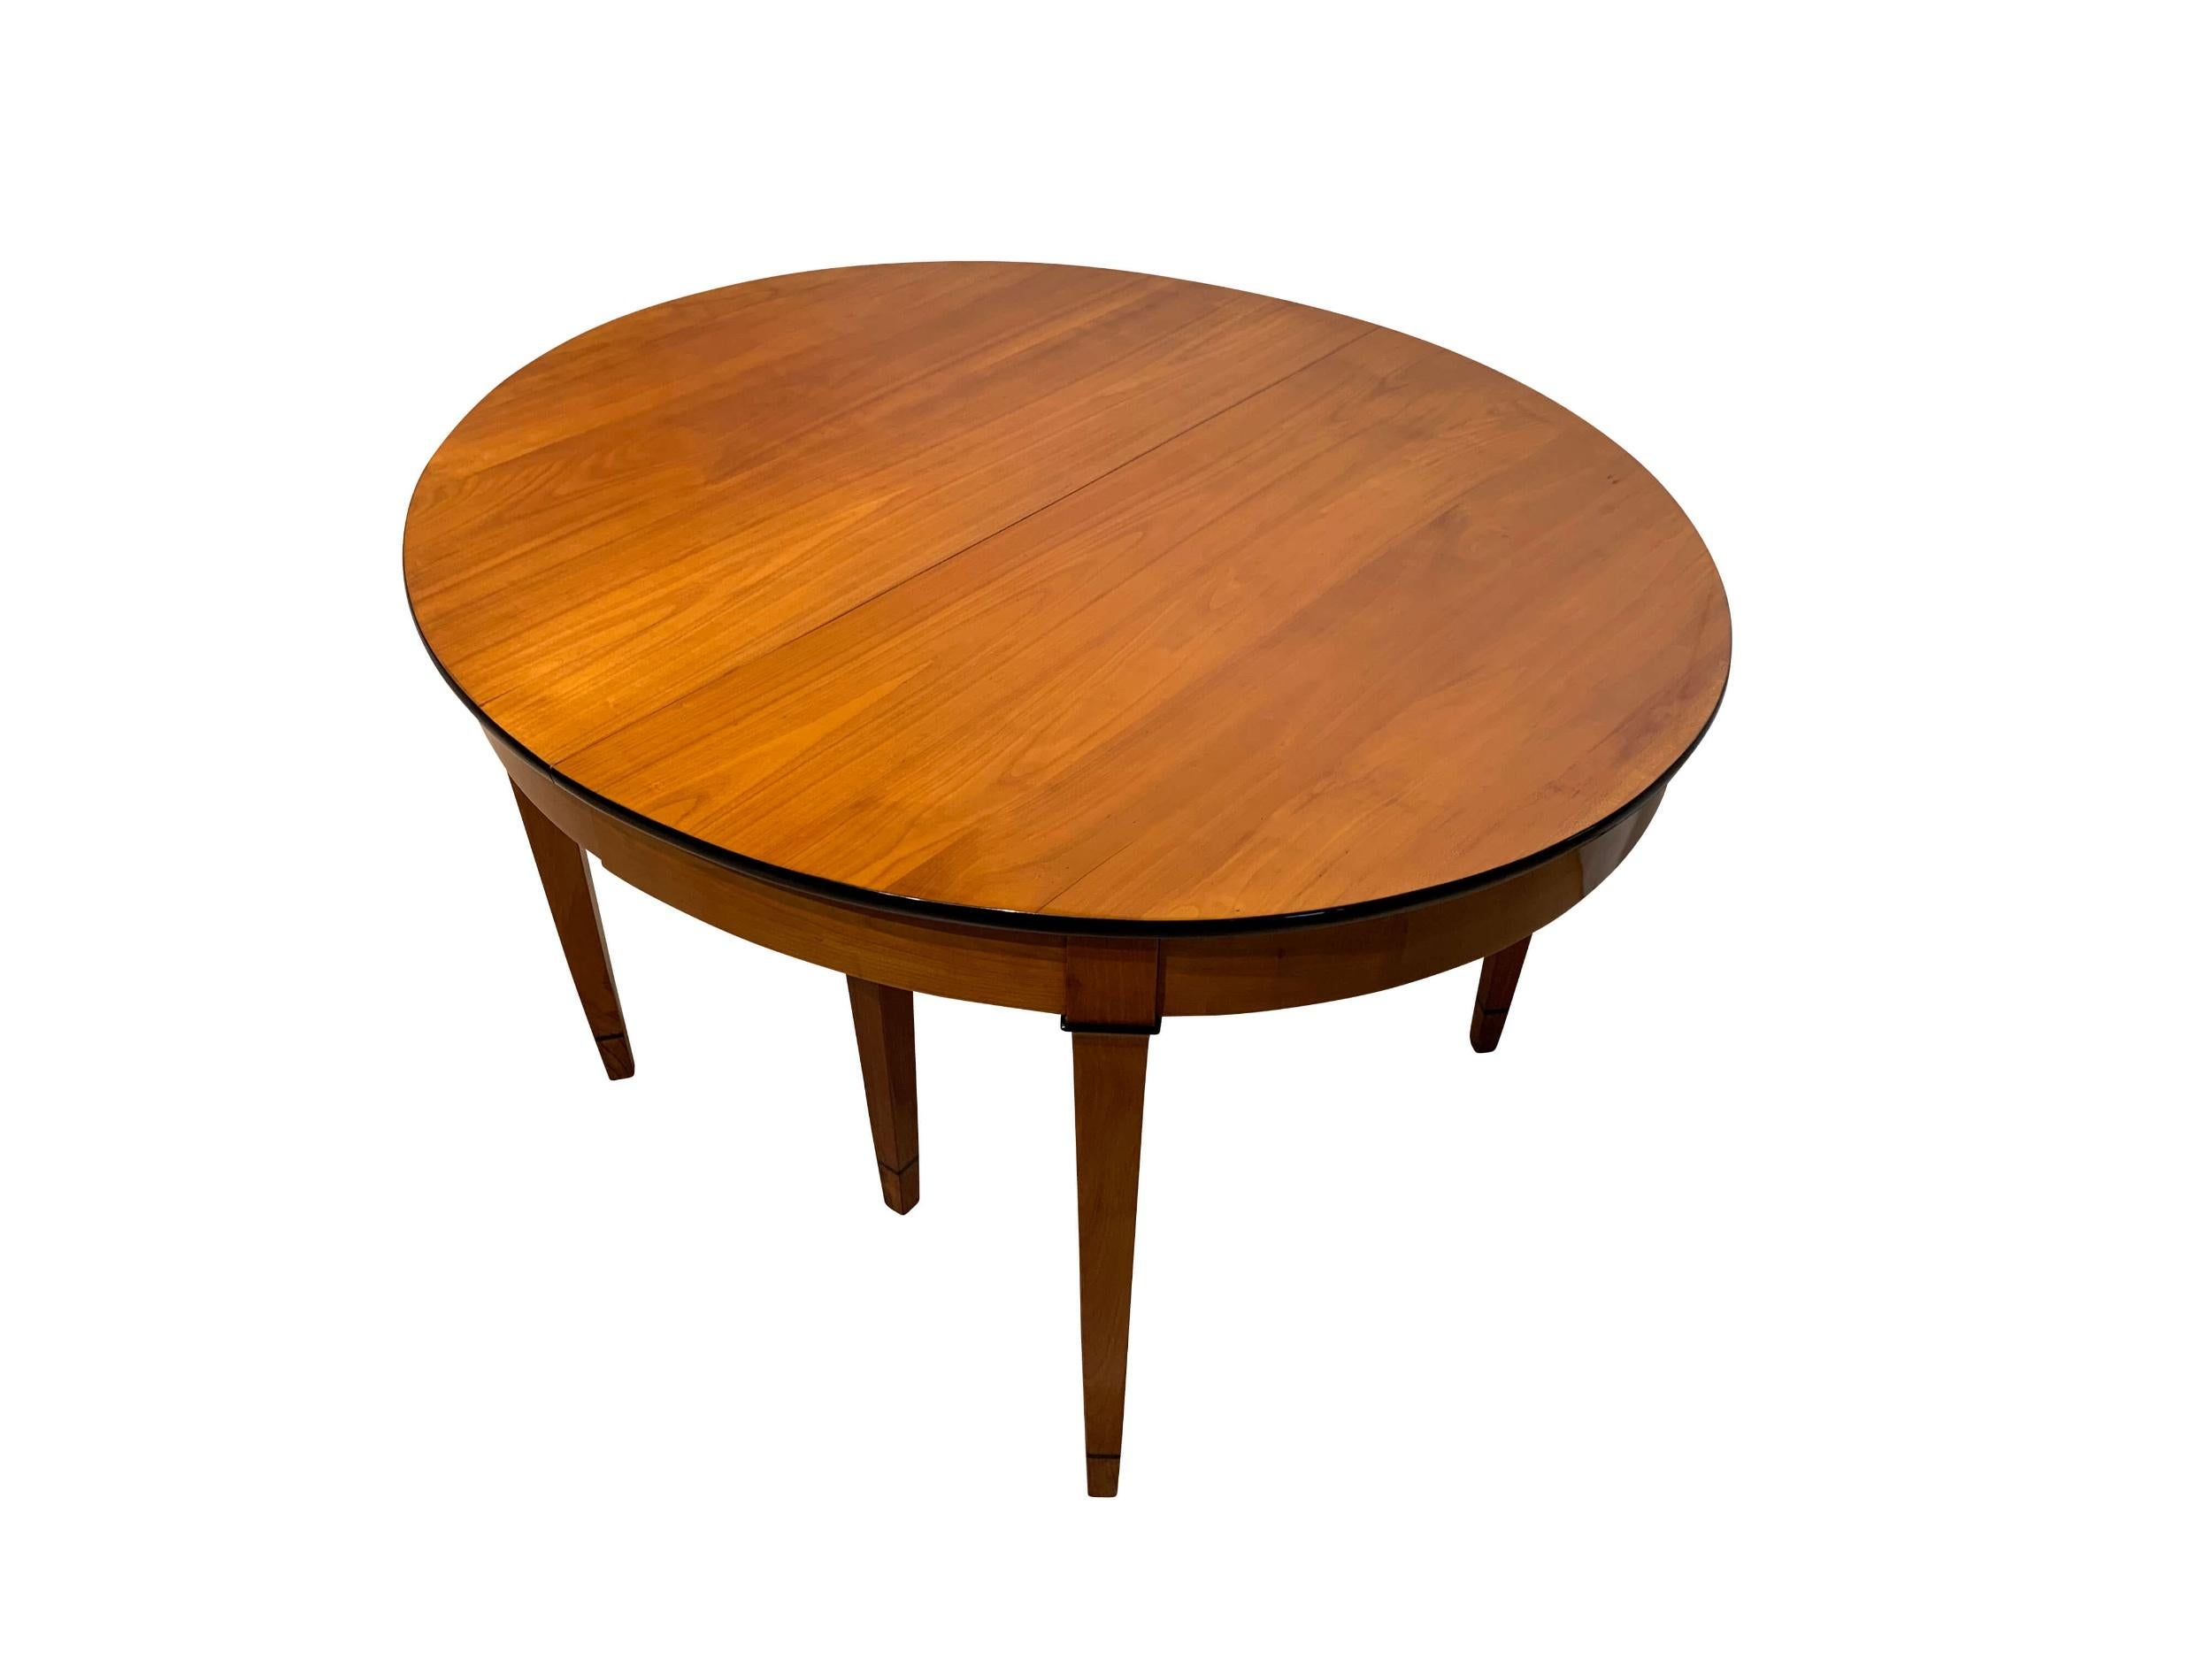 French Round Expandable Dining Table, Cherry Wood, France, Paris circa 1880